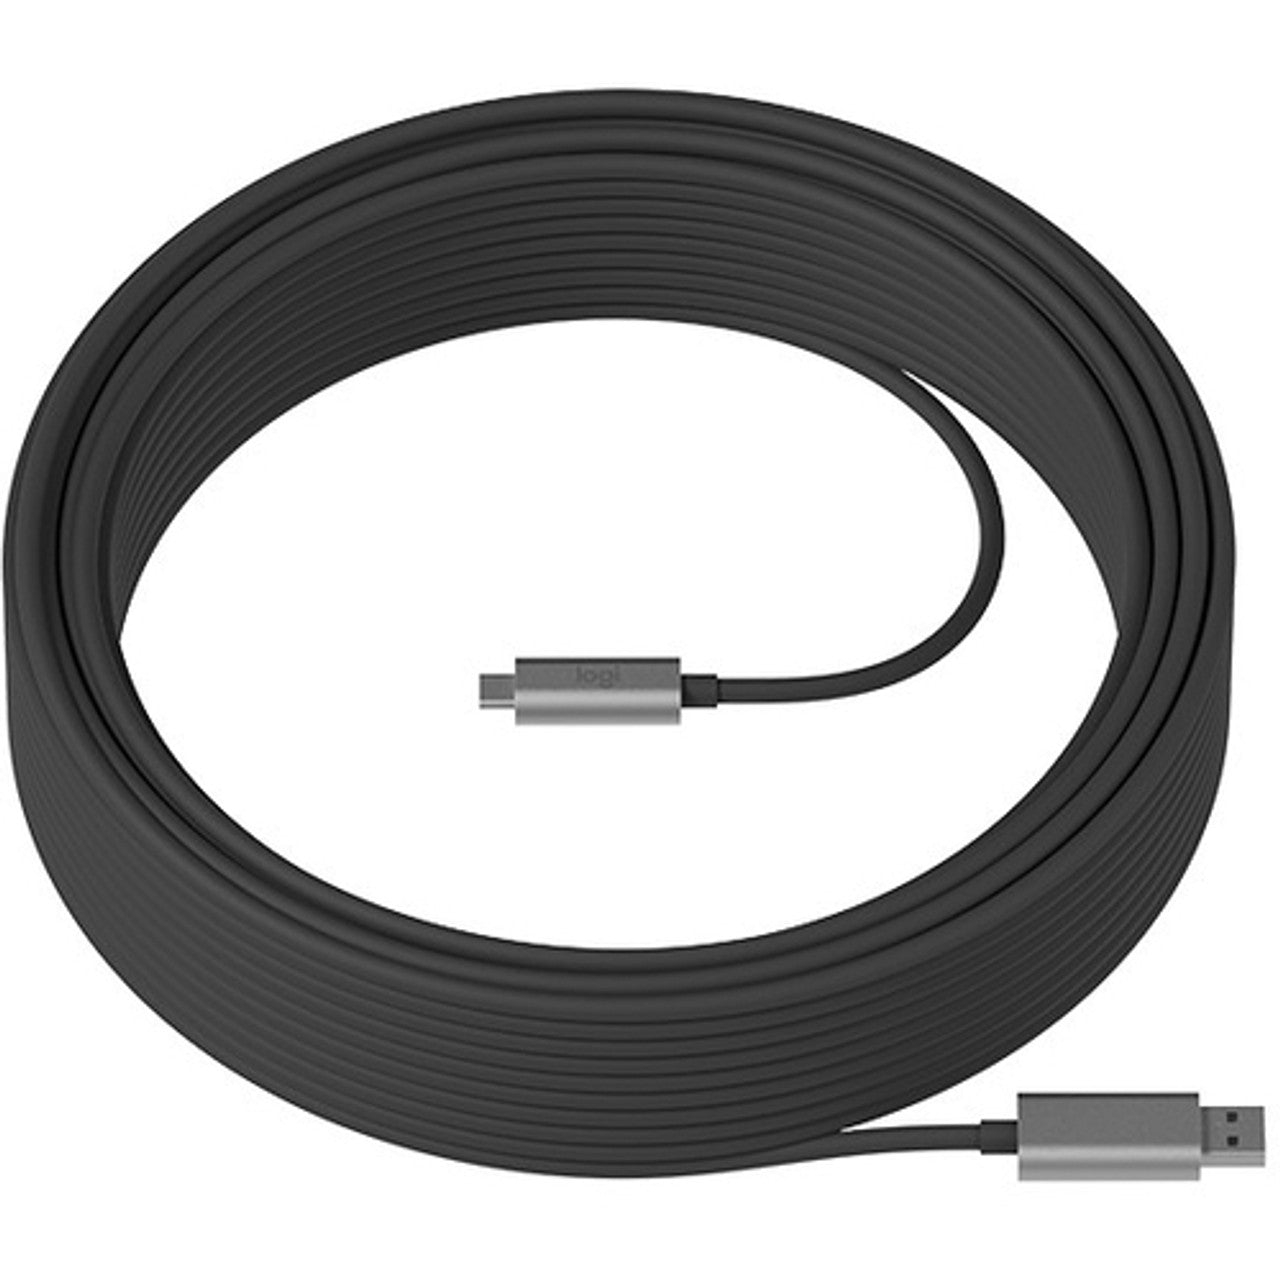 Logitech MeetUp Mic Extension Cable (950-000005) - 10 meters